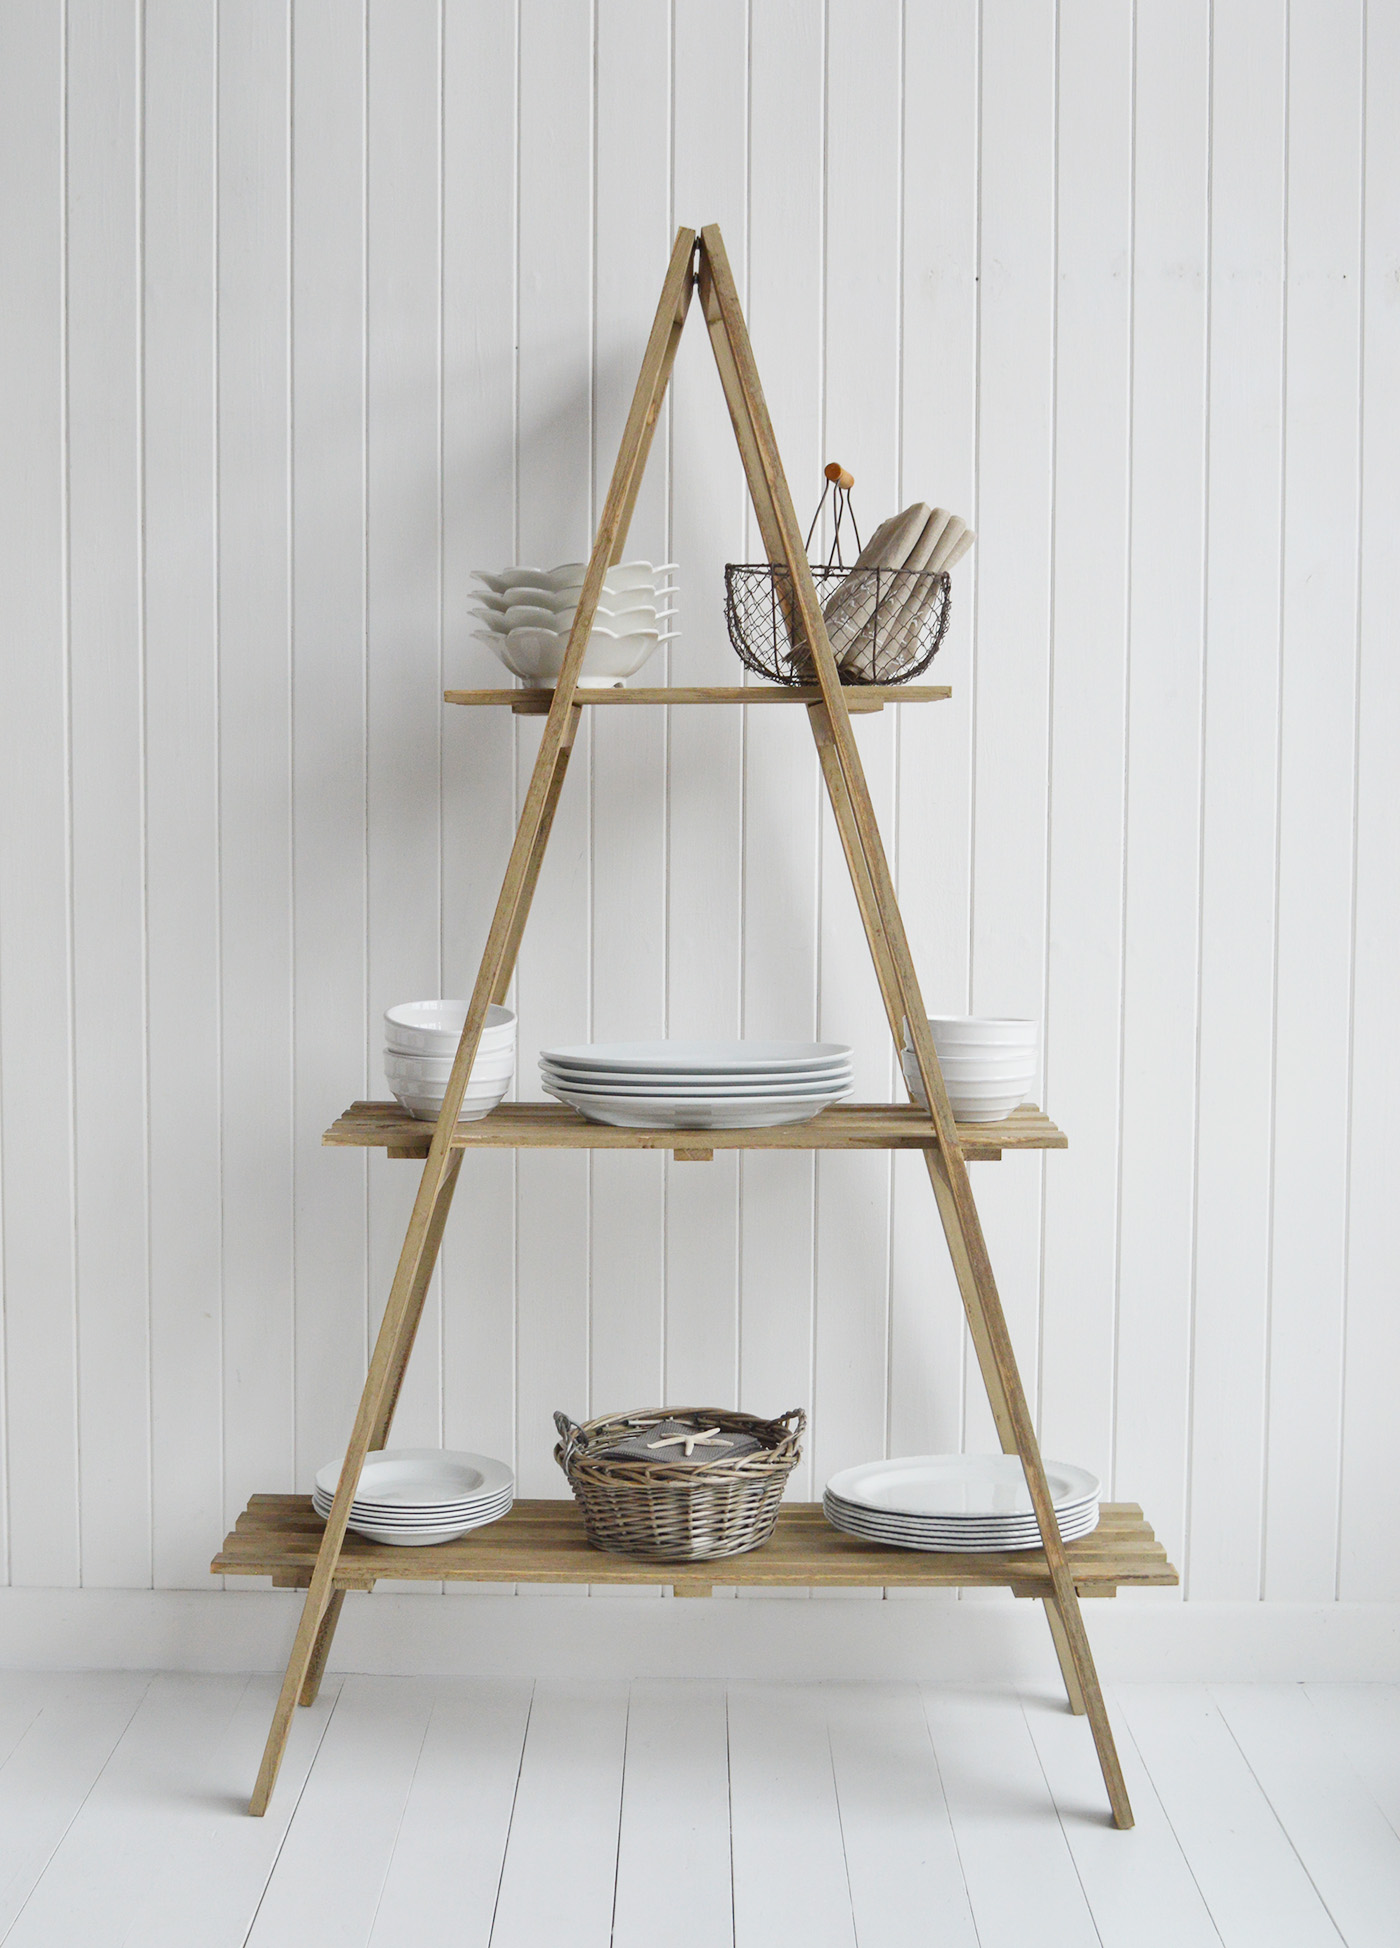 Jackson freestanding shelf unit - New England Country Coastal Furniture</ from The White Lighthouse Furniture. Bathroom, Living Room, Bedroom and Hallway Furniture for beautiful homes in New England, coastal, city  and country home interiors